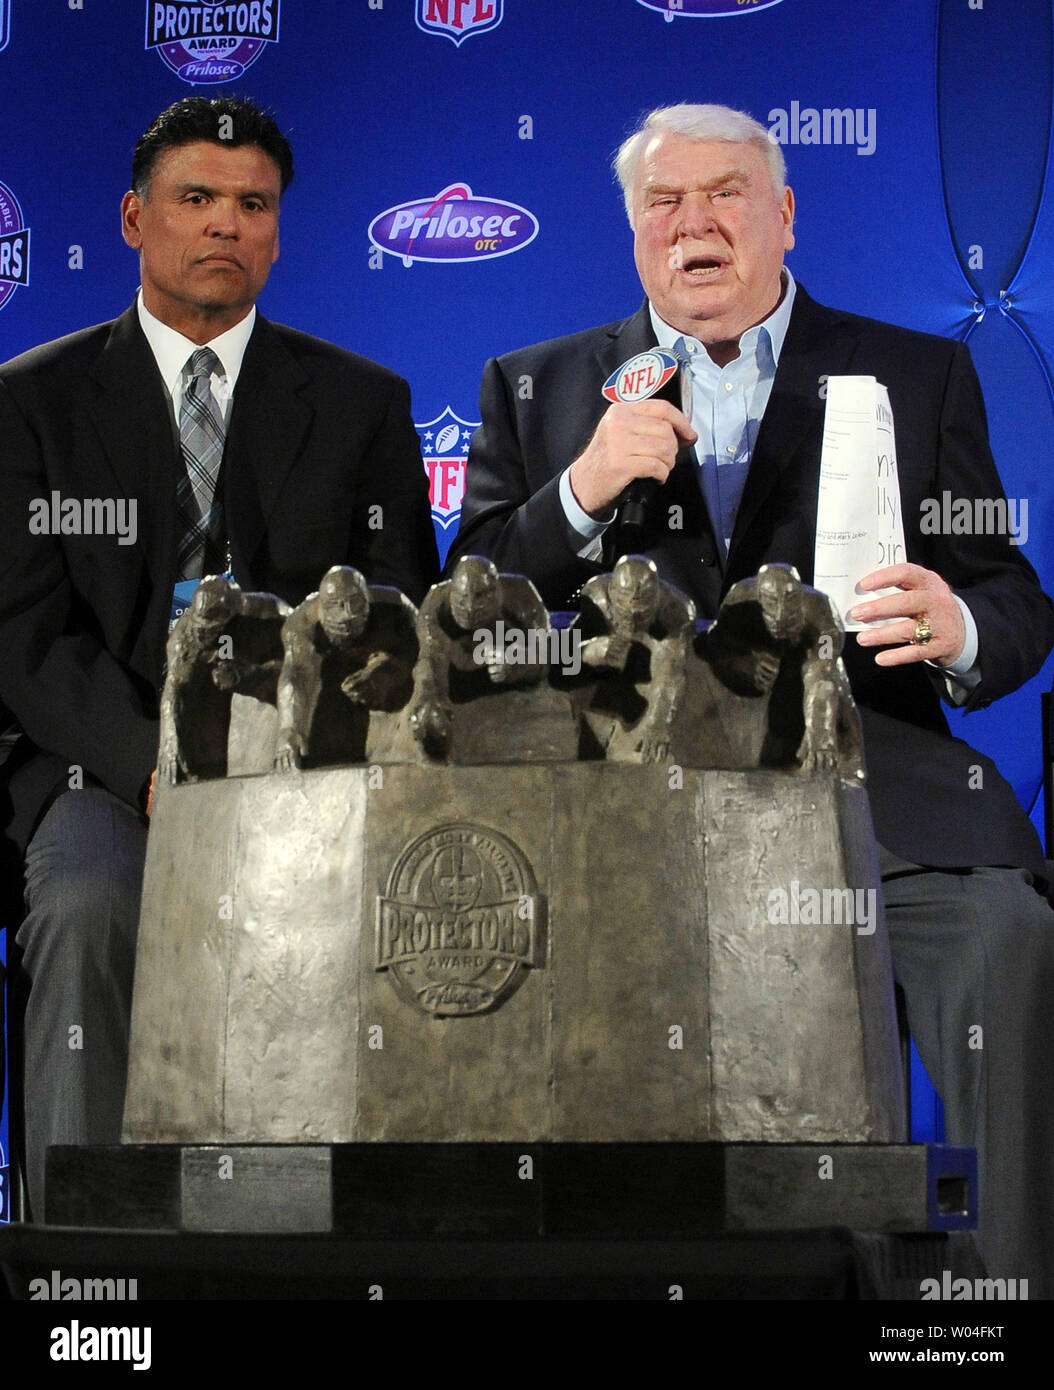 John Madden (R) and Anthony Munoz announce the New England Patriots as winners of the Madden Most Valuable Protectors Award as the year's best offensive line during the week of Super Bowl XLV in Dallas, Texas, on February 3, 2011. The Pittsburgh Steelers will take on the Green Bay Packers on February 6, 2011.    UPI/Roger L. Wollenberg Stock Photo